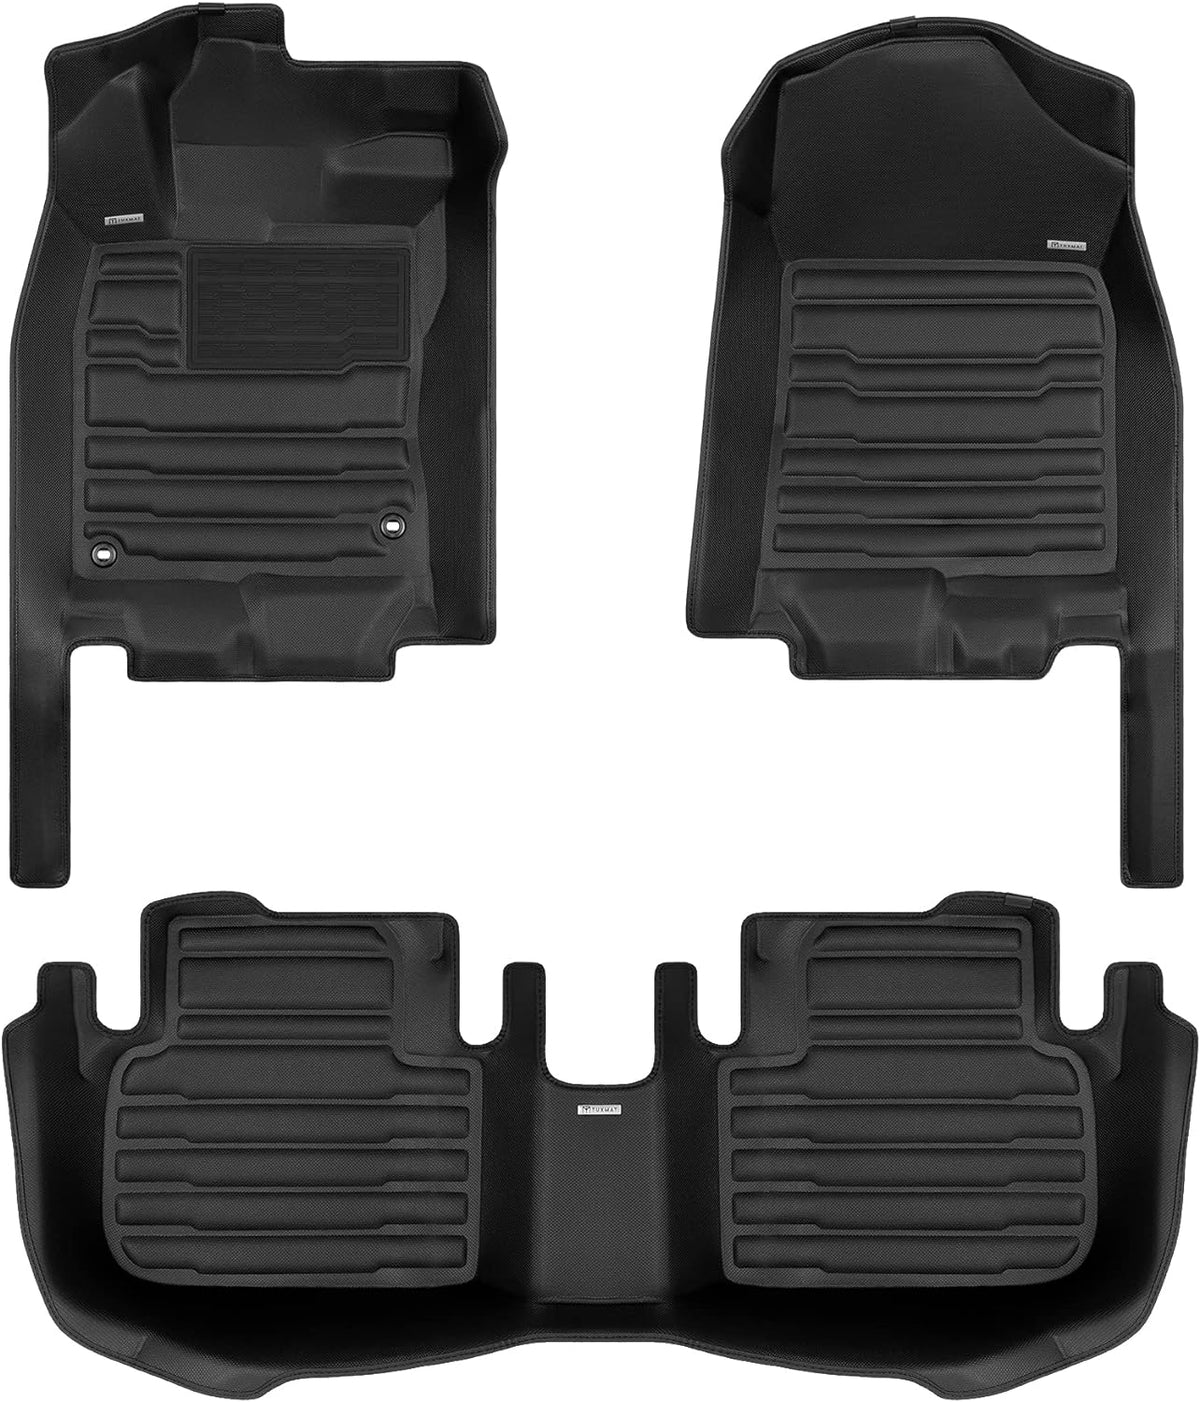 TuxMat 8704 - for Honda Civic  Without Rear USB Charging Port 2022-2024 Models - Custom Car Mats - Maximum Coverage, All Weather, Laser Measured - This Full Set Includes 1st and 2nd Rows